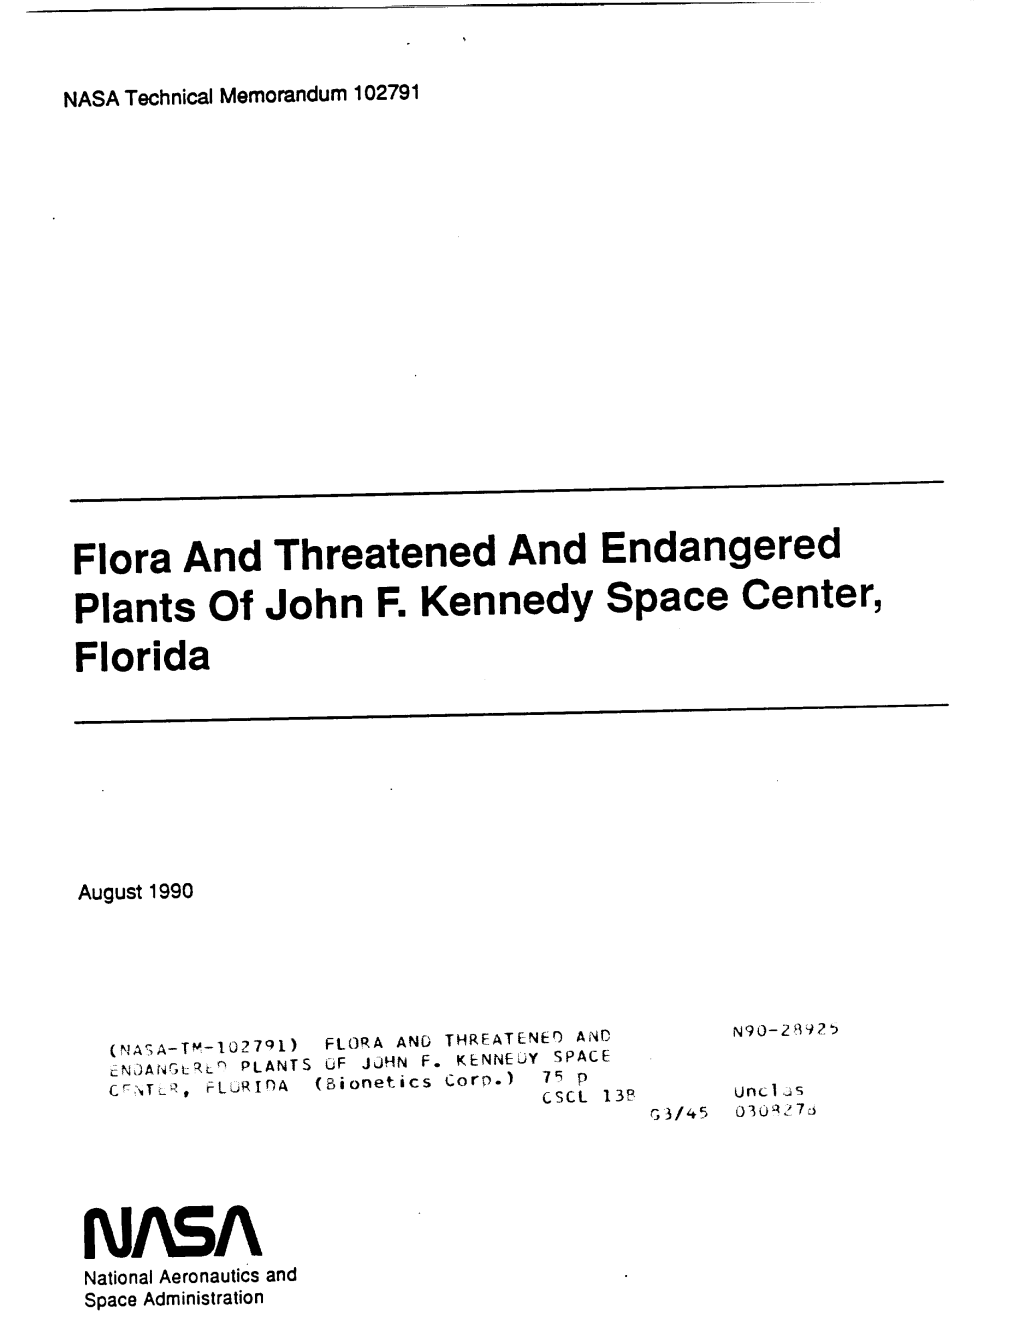 Flora and Threatened and Endangered Plants of John F